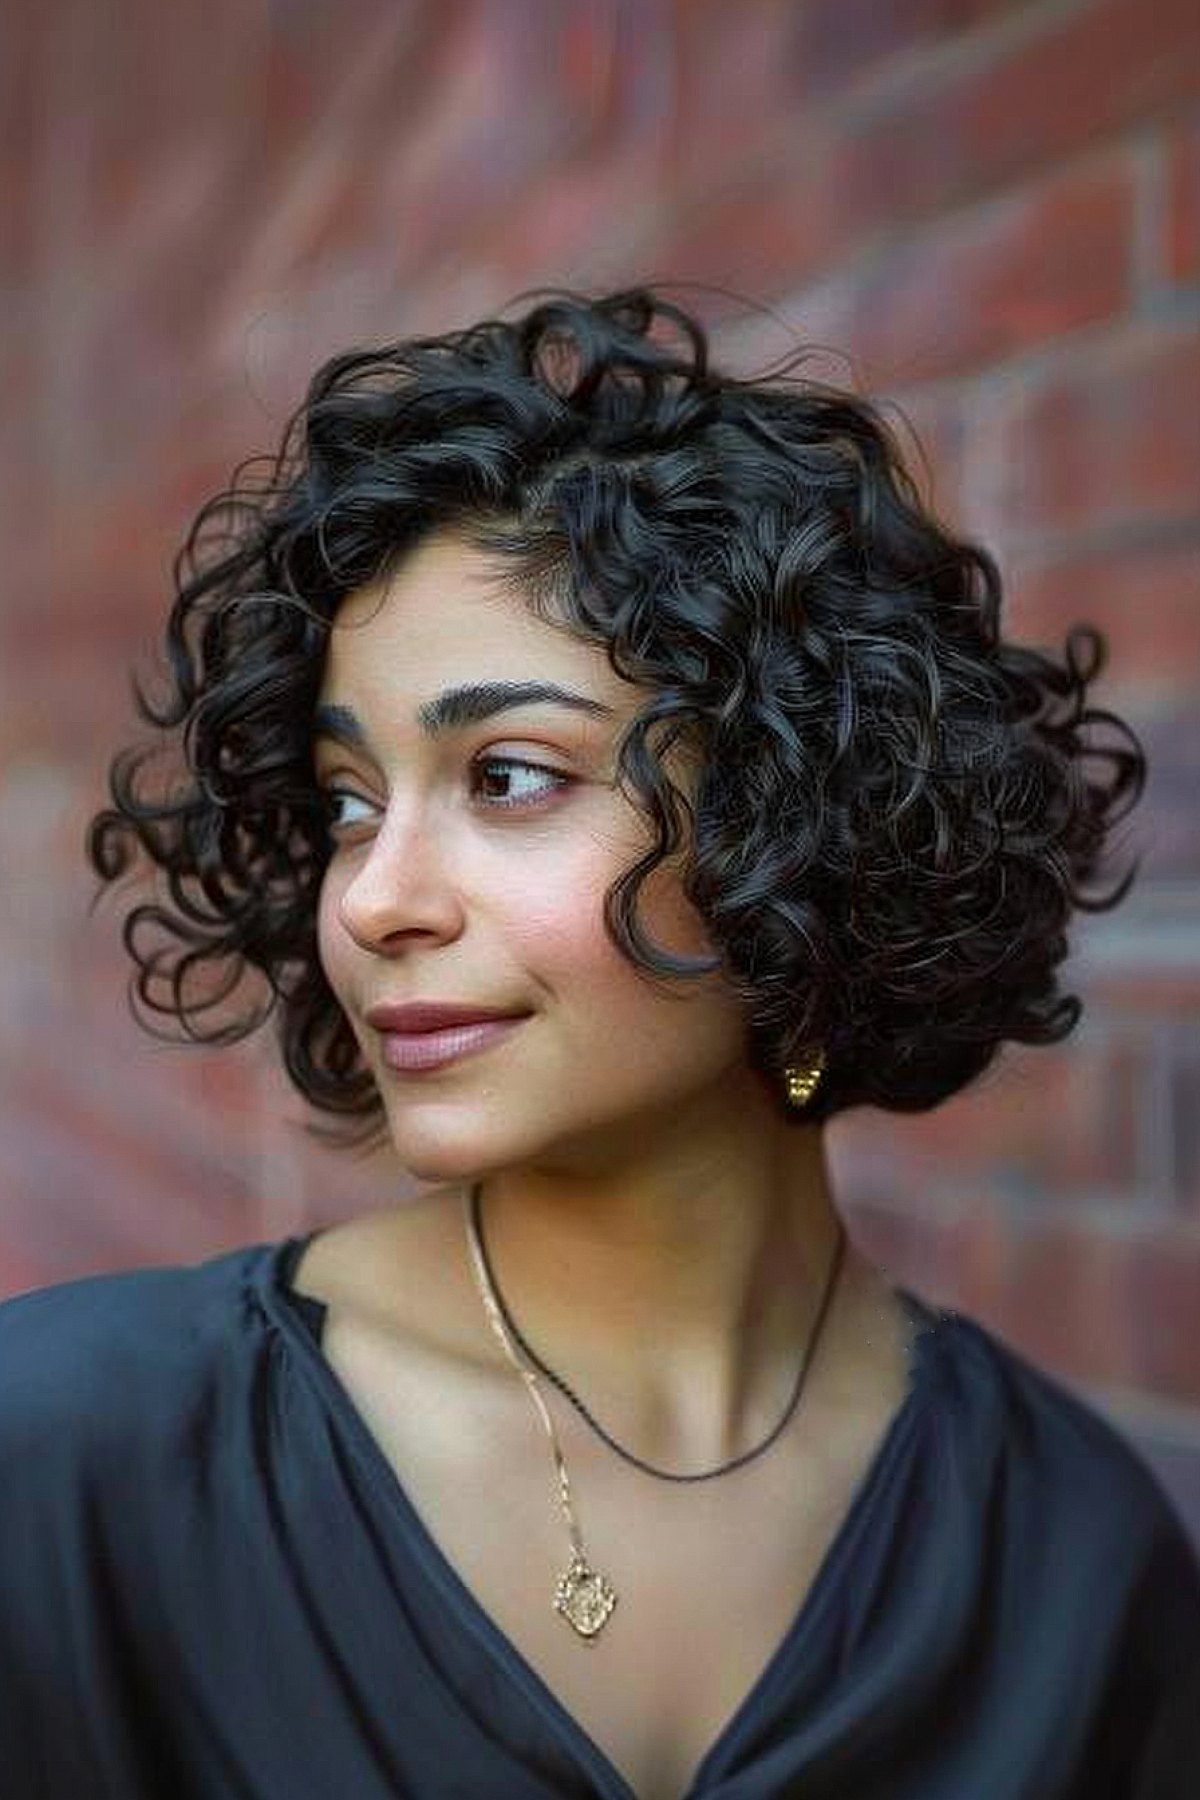 Woman with a jaw-length curly bob haircut highlighting her heart-shaped face, perfect for spring rejuvenation